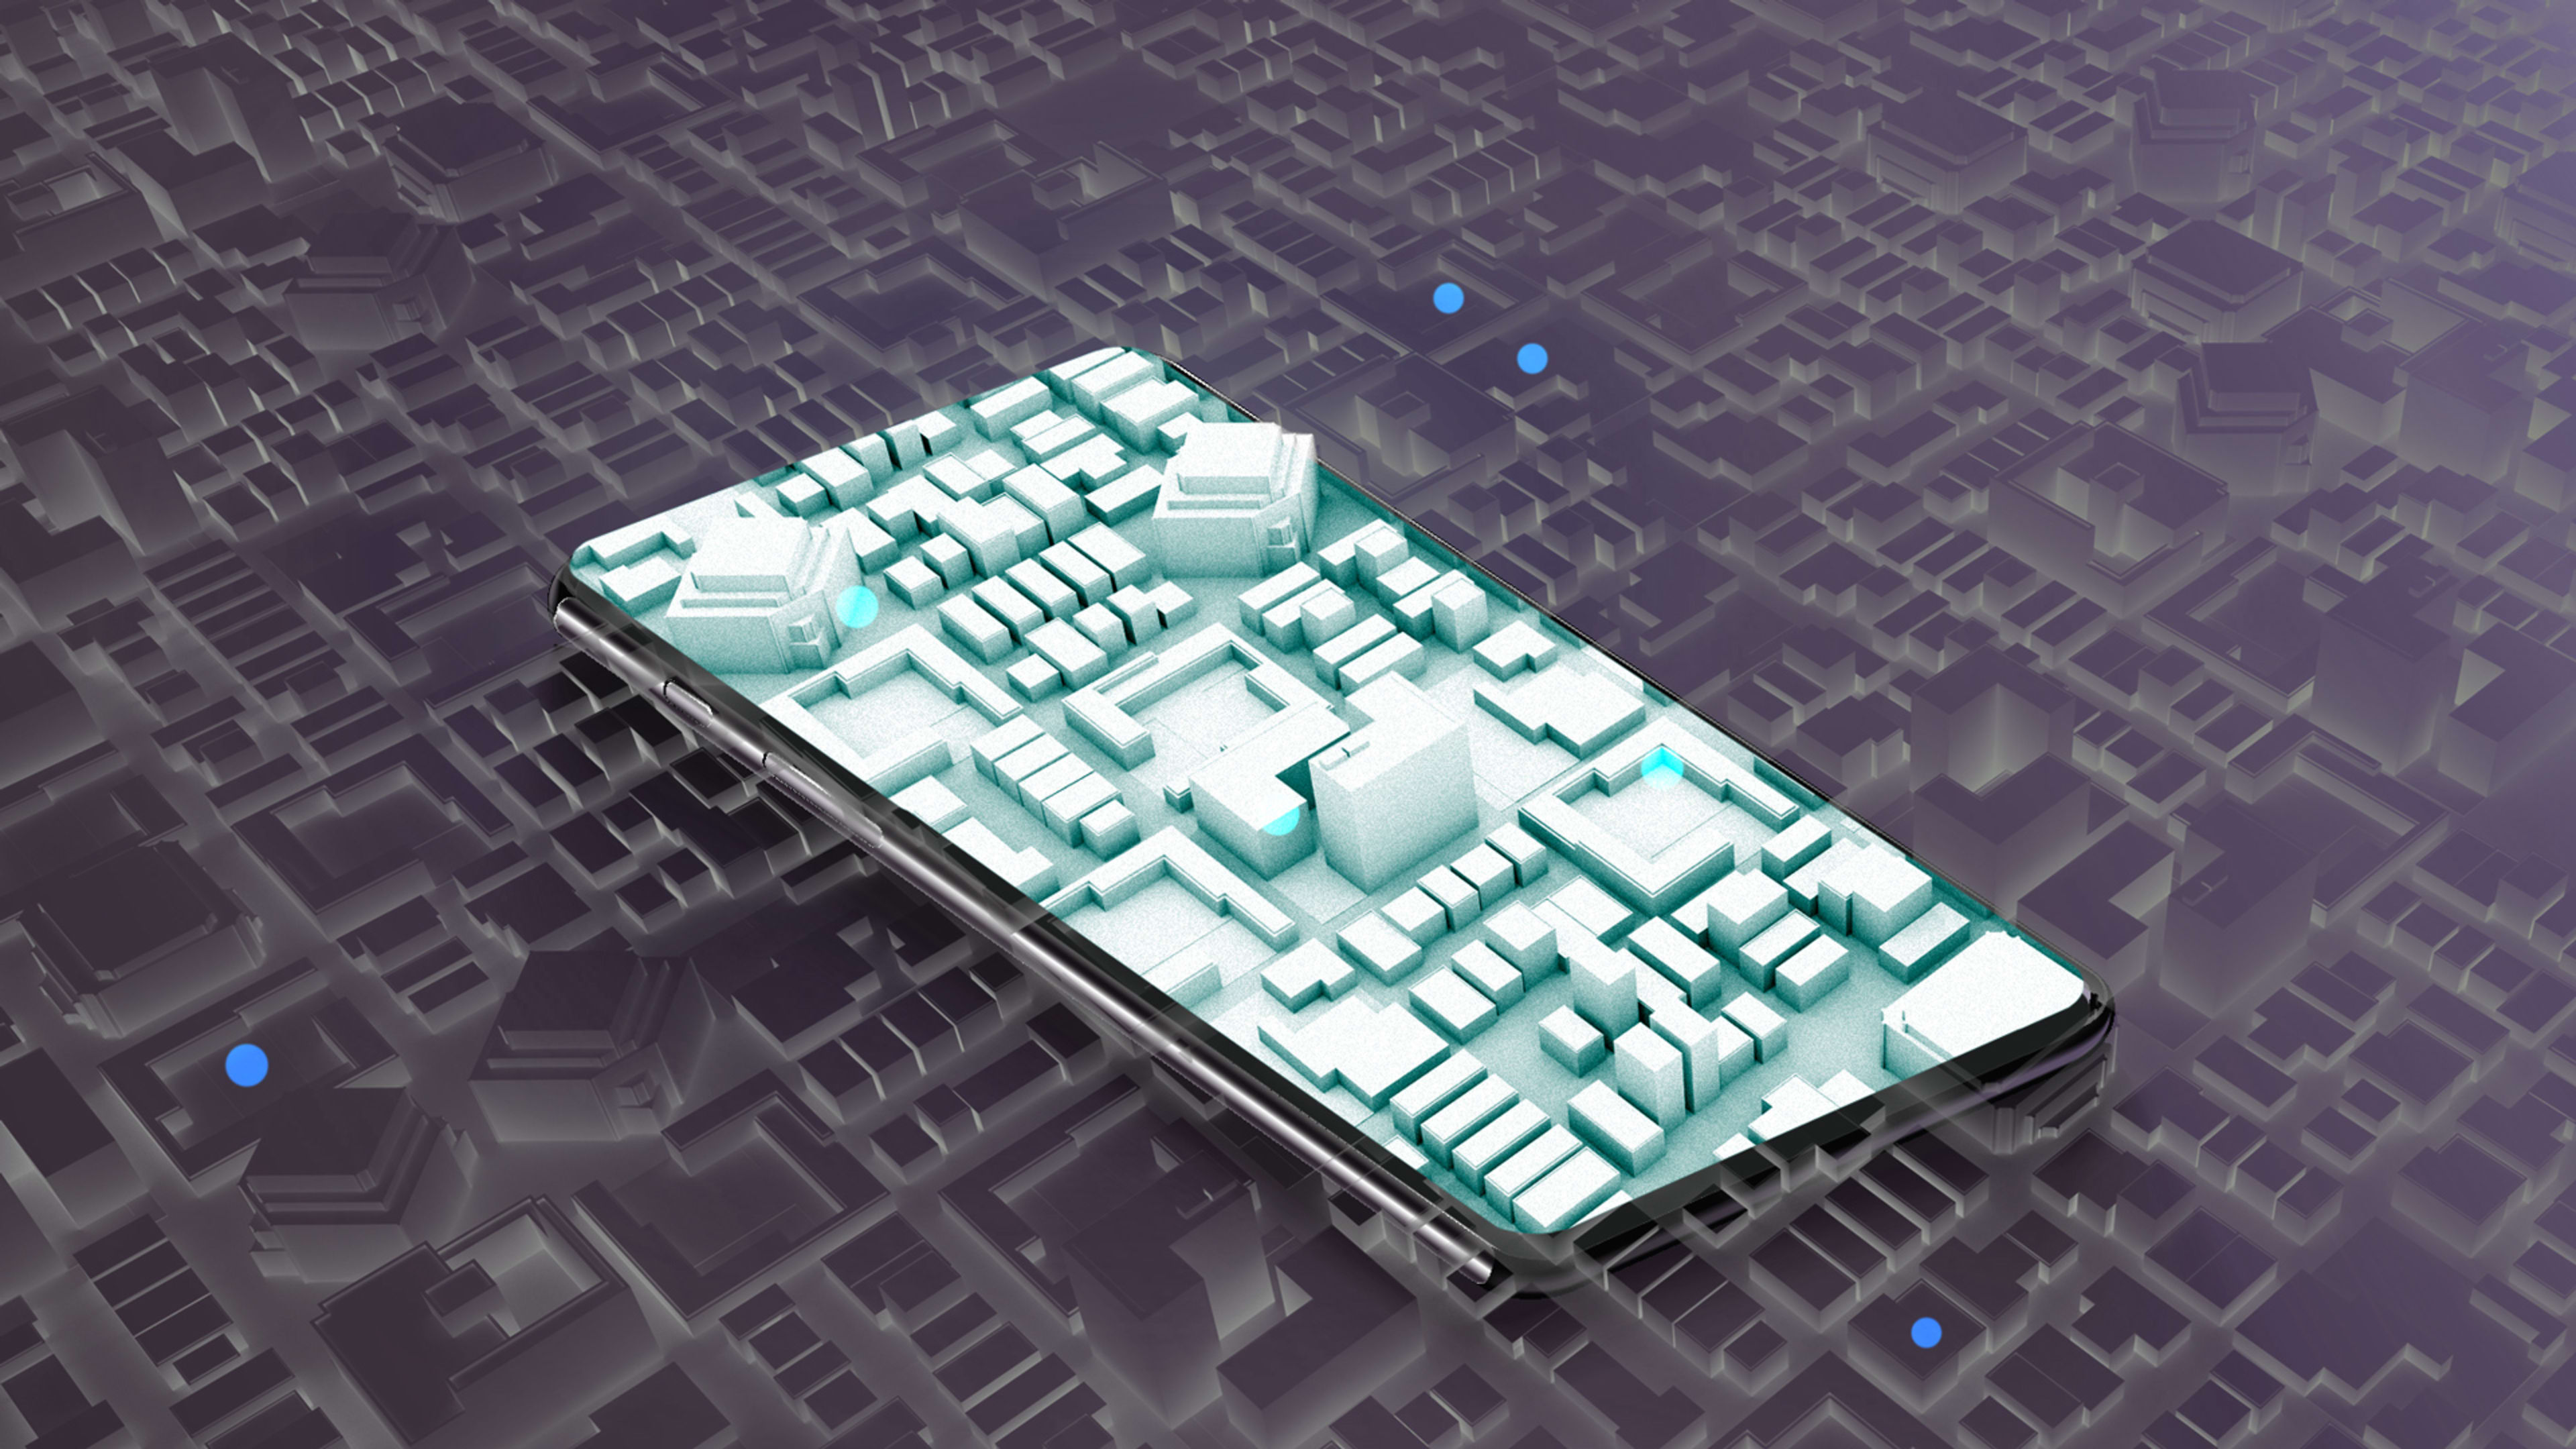 This unsettling practice turns your phone into a tracking device for the government